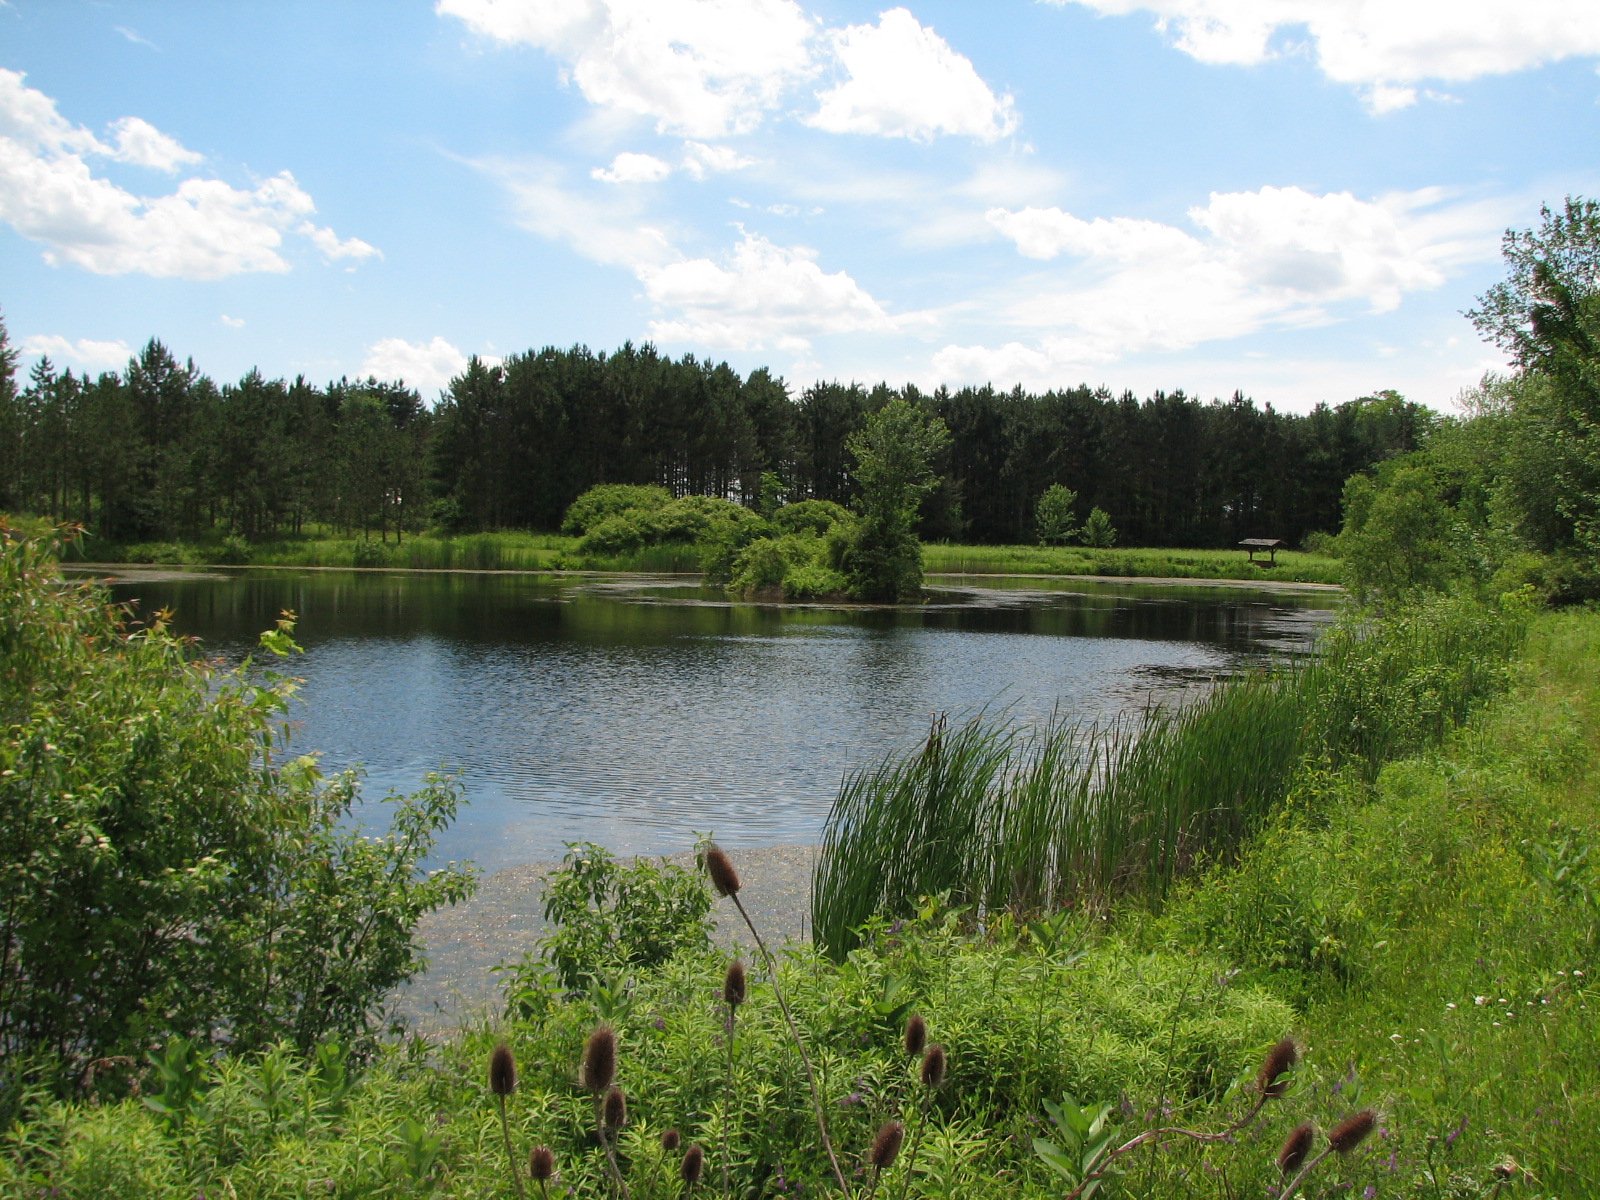 Caley Reservation's natural pond